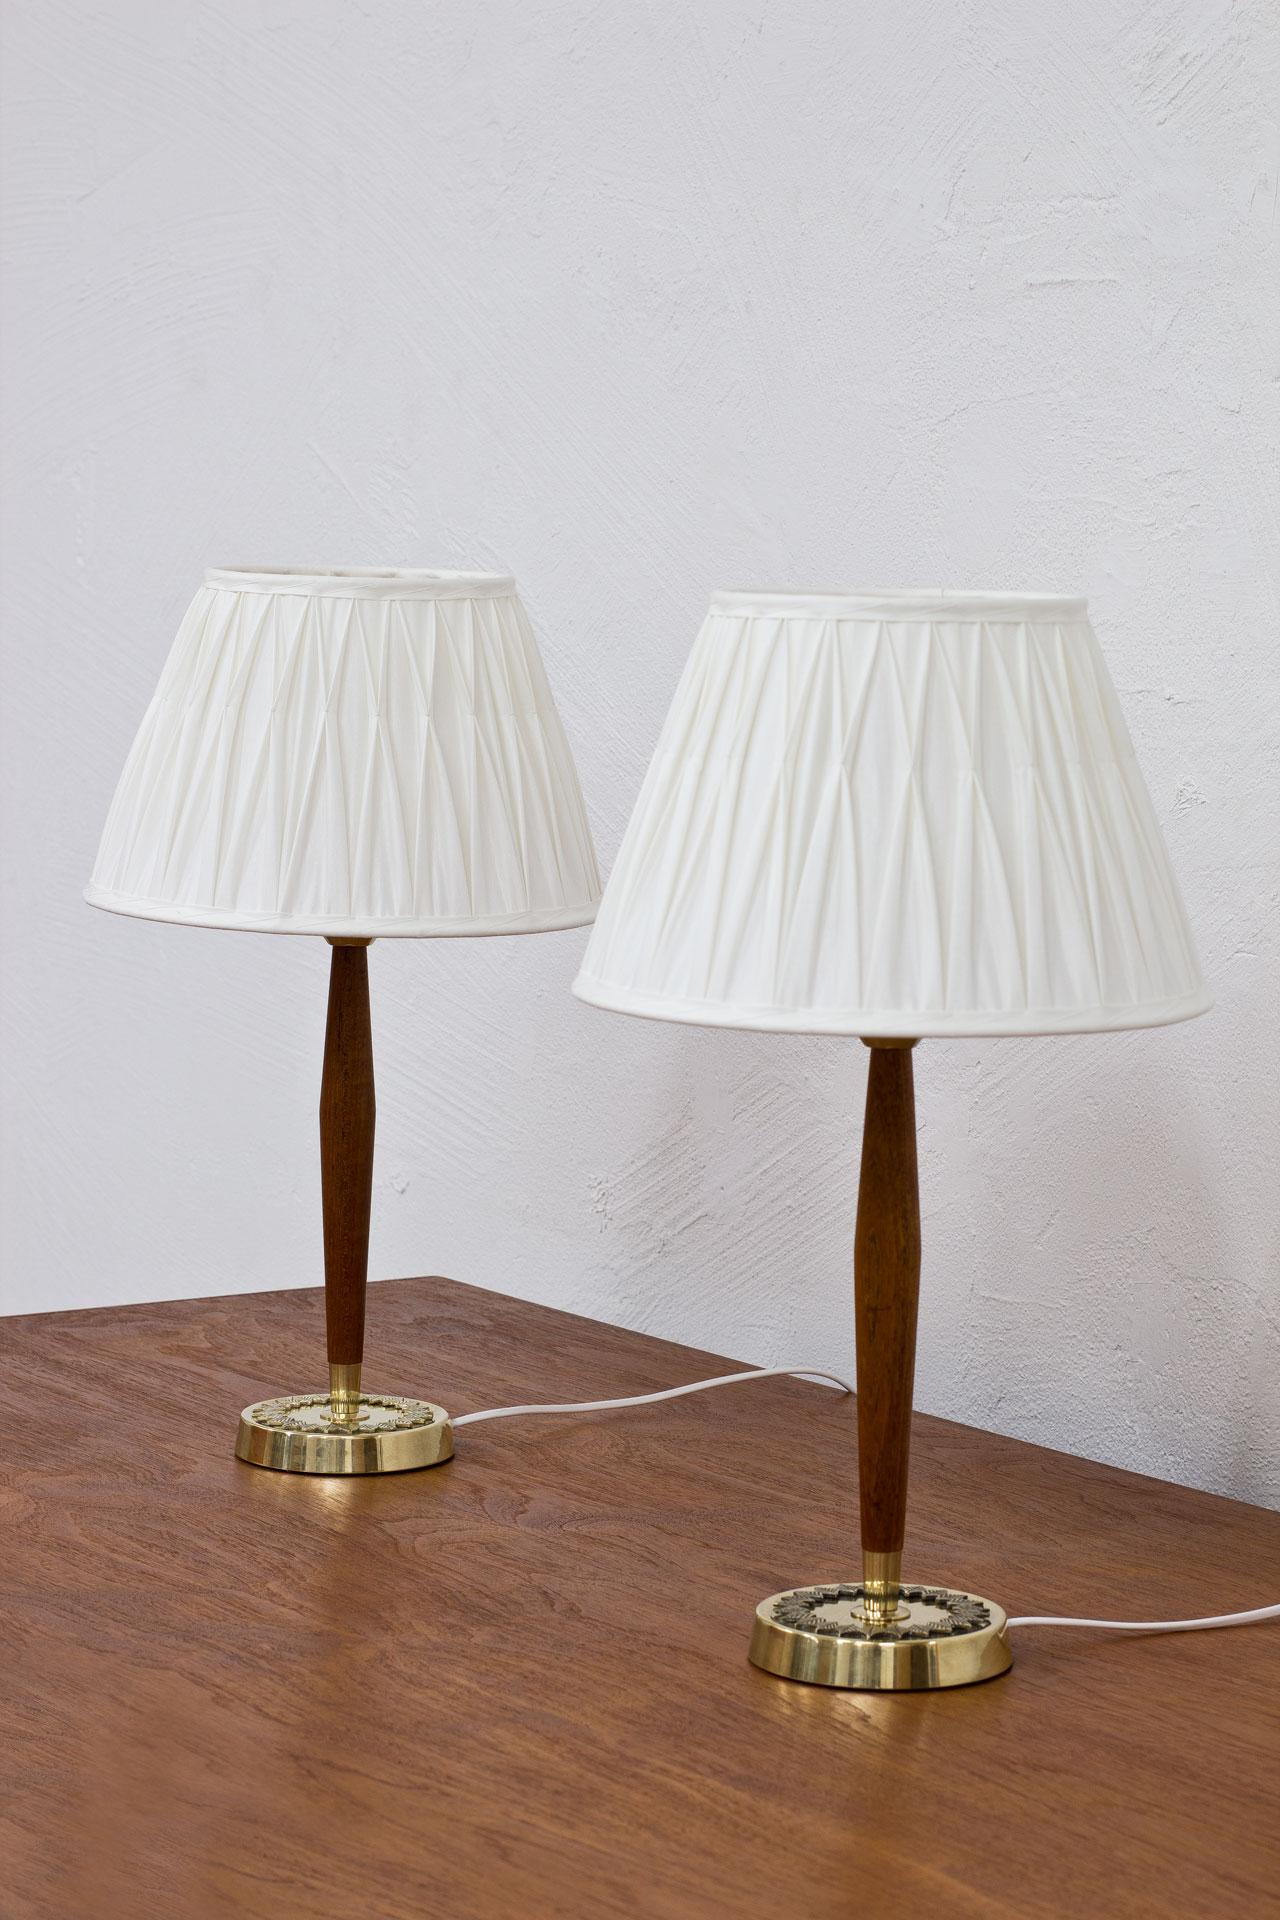 20th Century Swedish Table Lamps by Hans Bergström for ASEA, 1950s